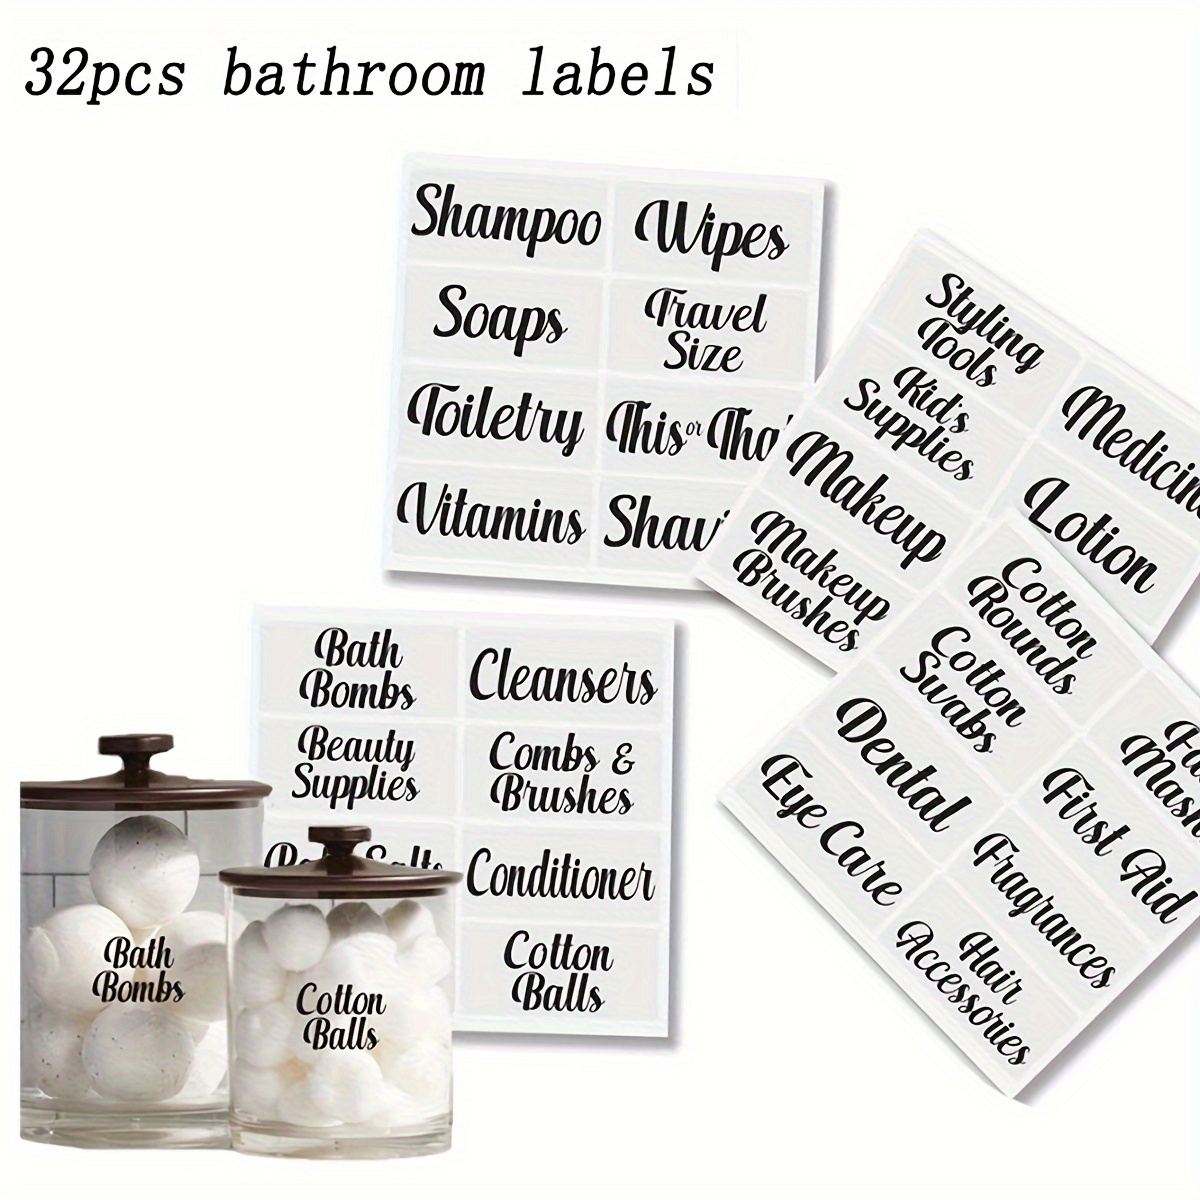 

32pcs Waterproof Bathroom Storage Labels - Clear Organization Stickers For Cotton Balls, & More - Durable & Easy To Use Without Electricity - Versatile Bathroom Accessories Set